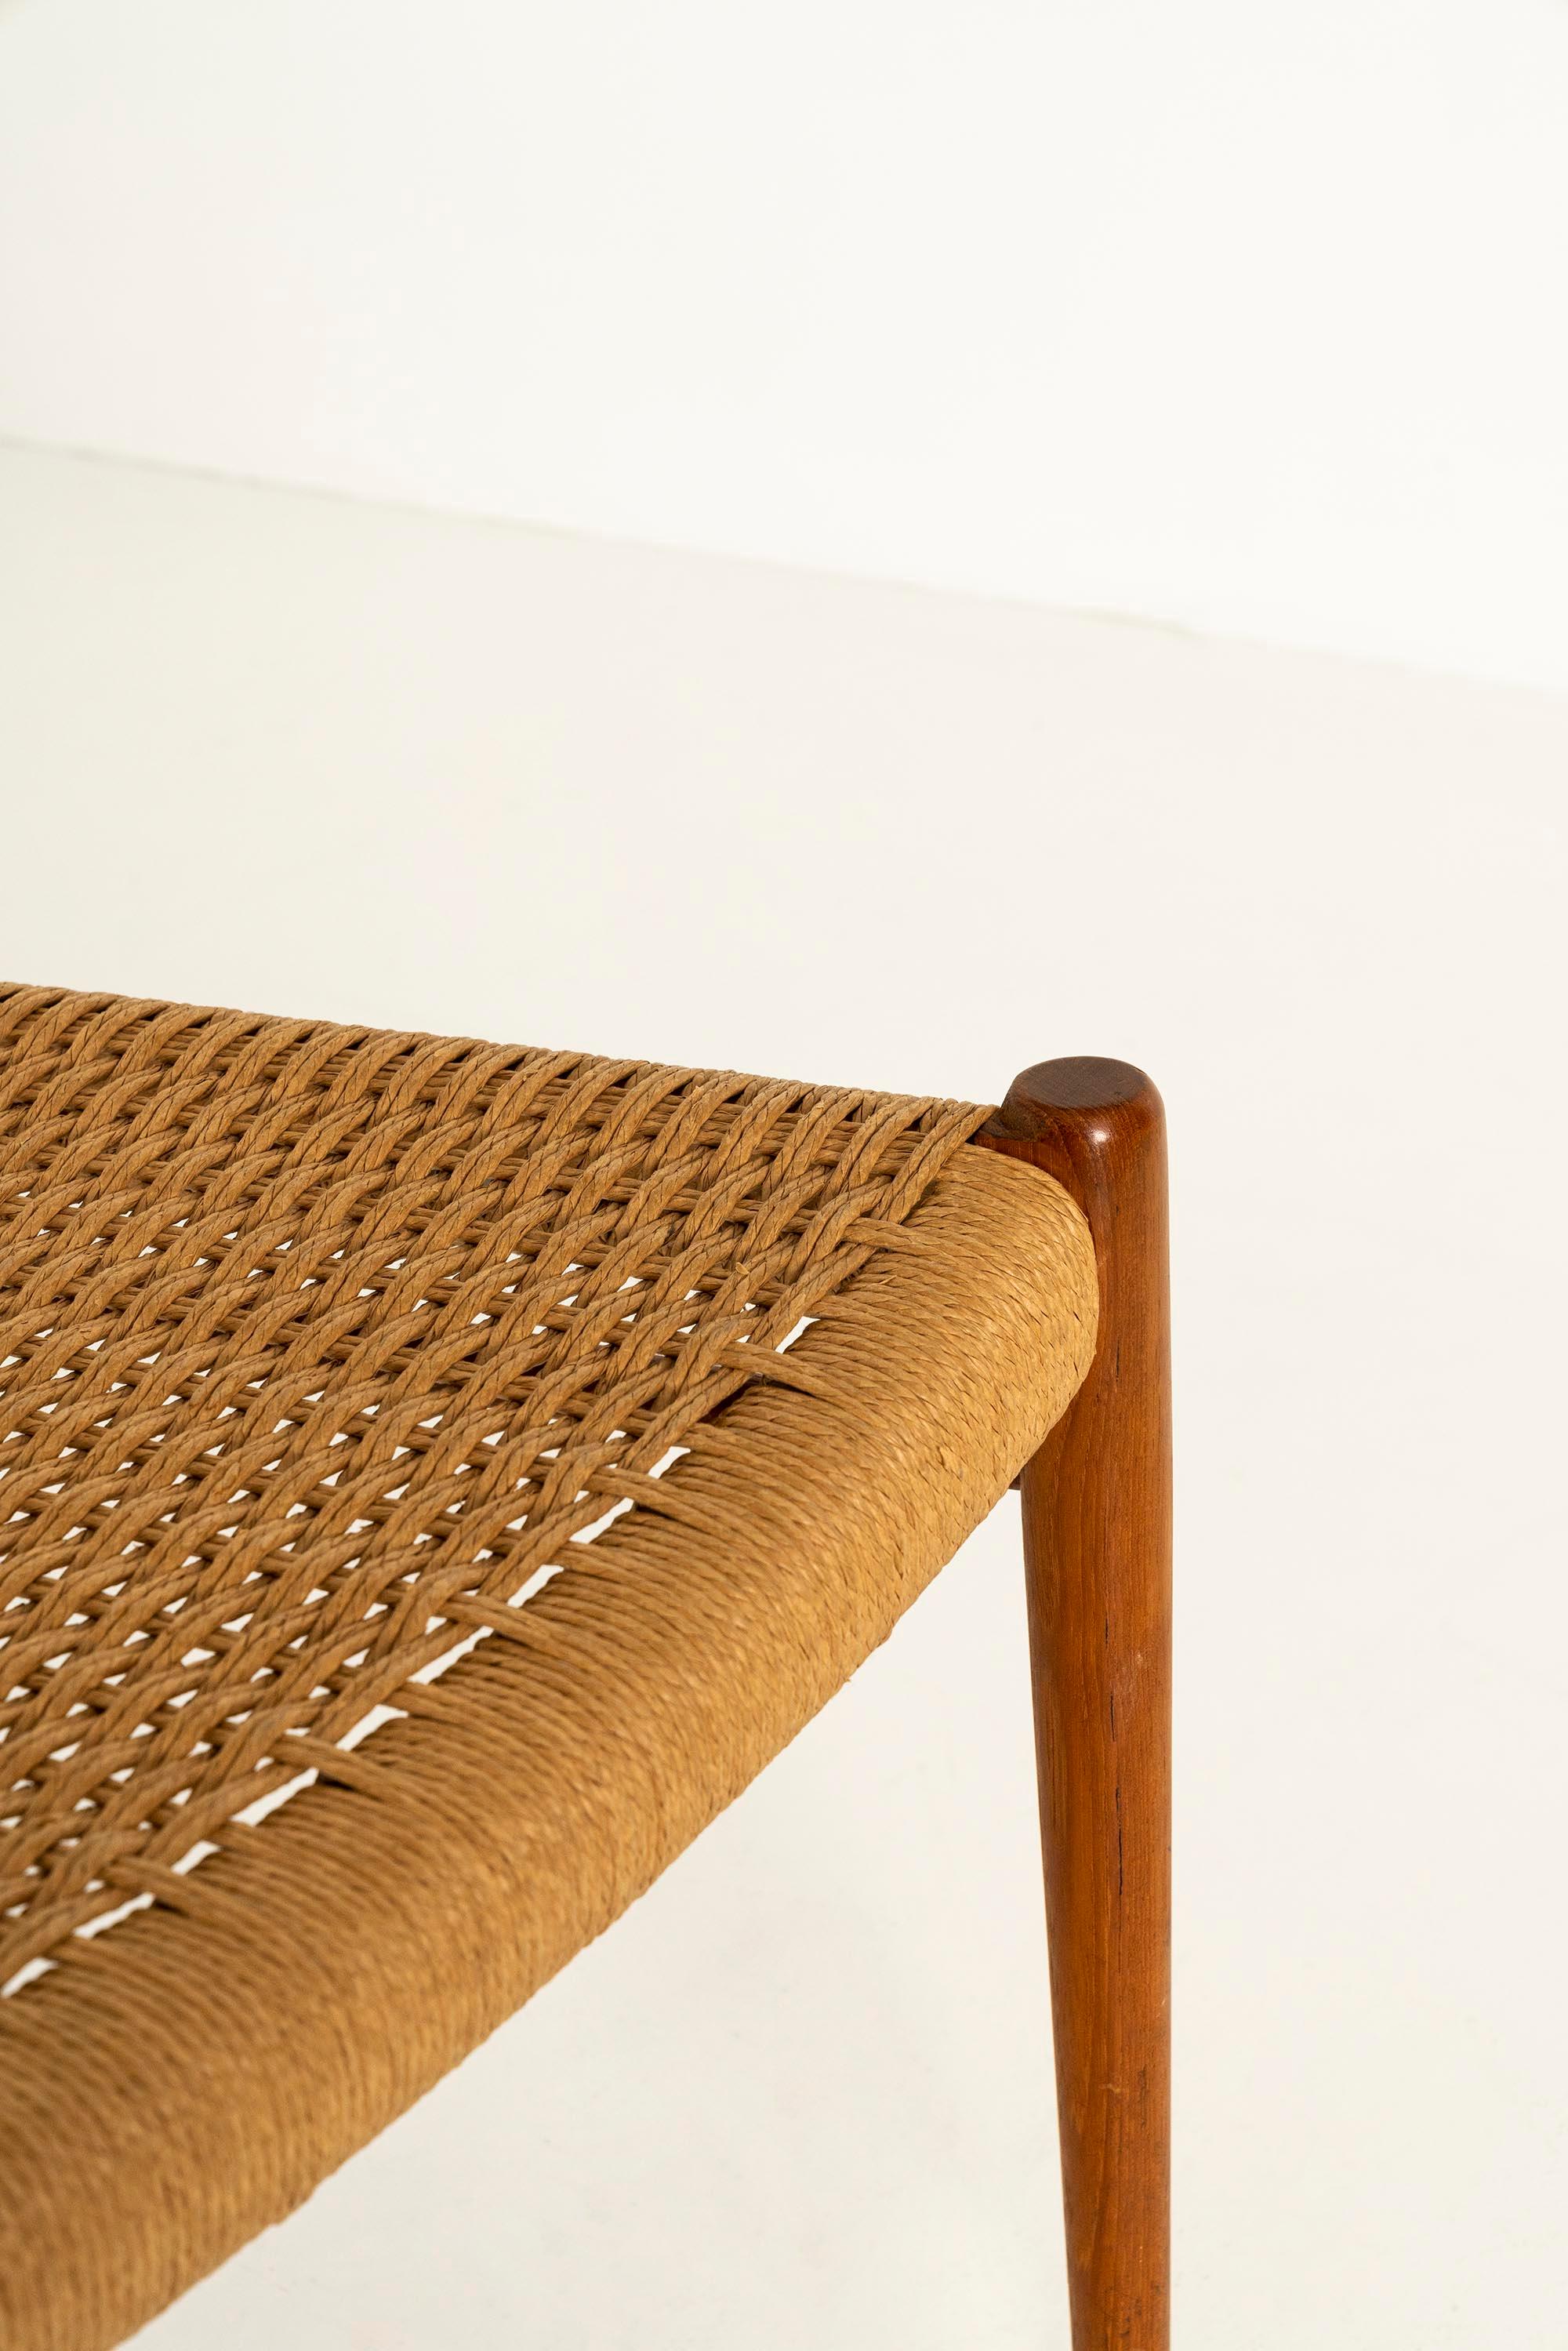 10 Niels Otto Møller 'Model 75' Chairs in Teak and Danish Paper Cord, 1960s For Sale 8